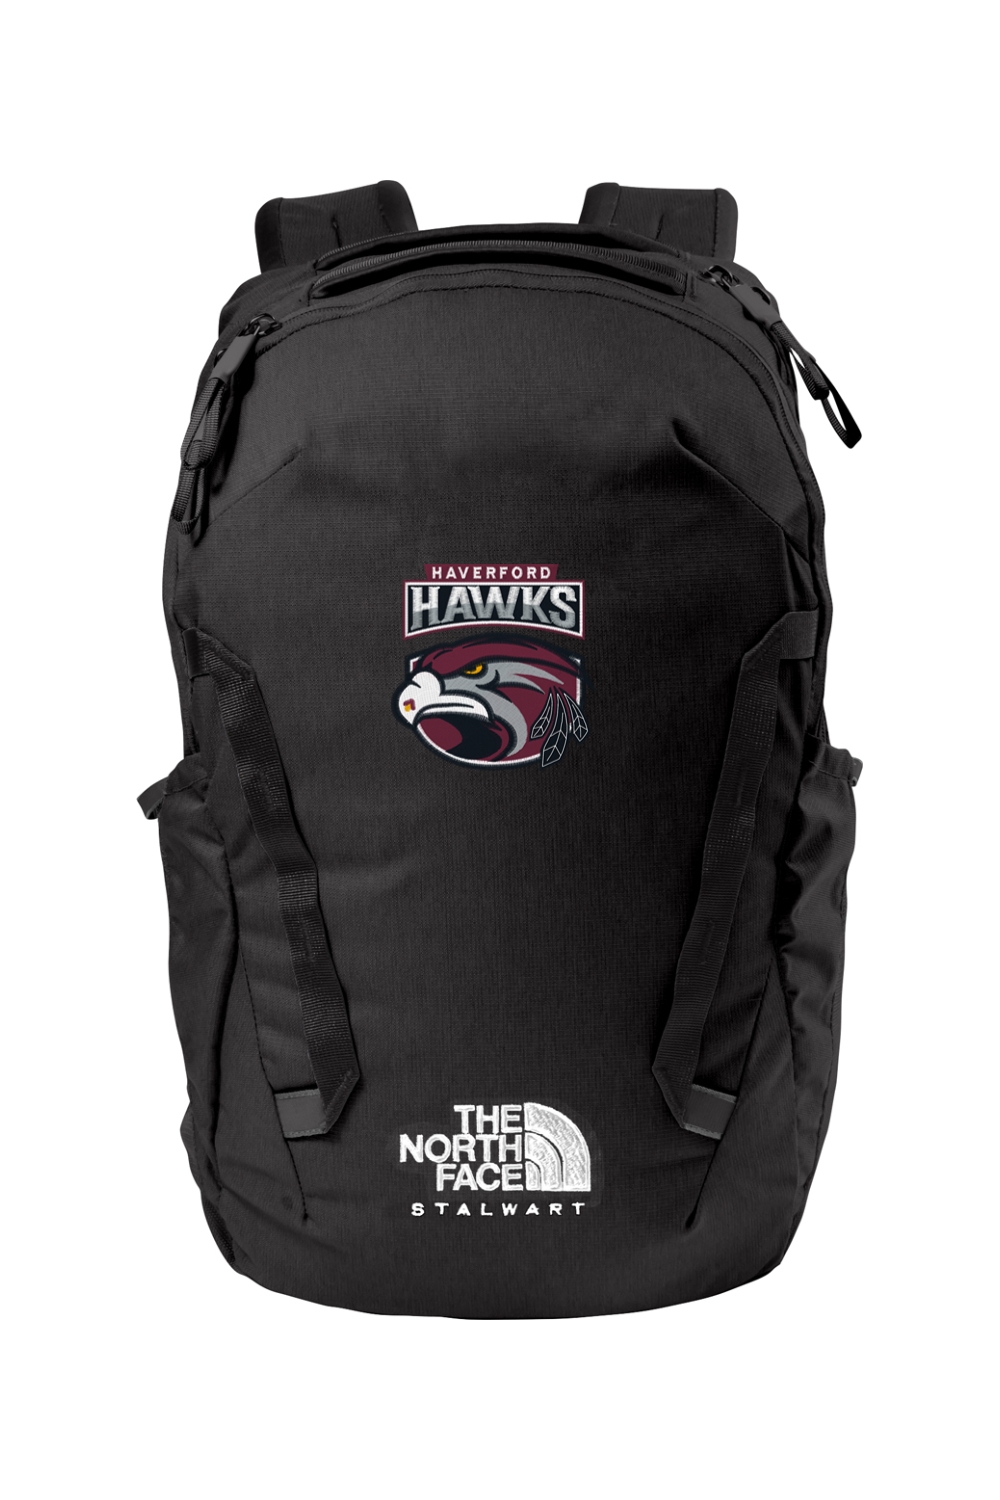 Hawks Embroidered The North Face Stalwart Backpack